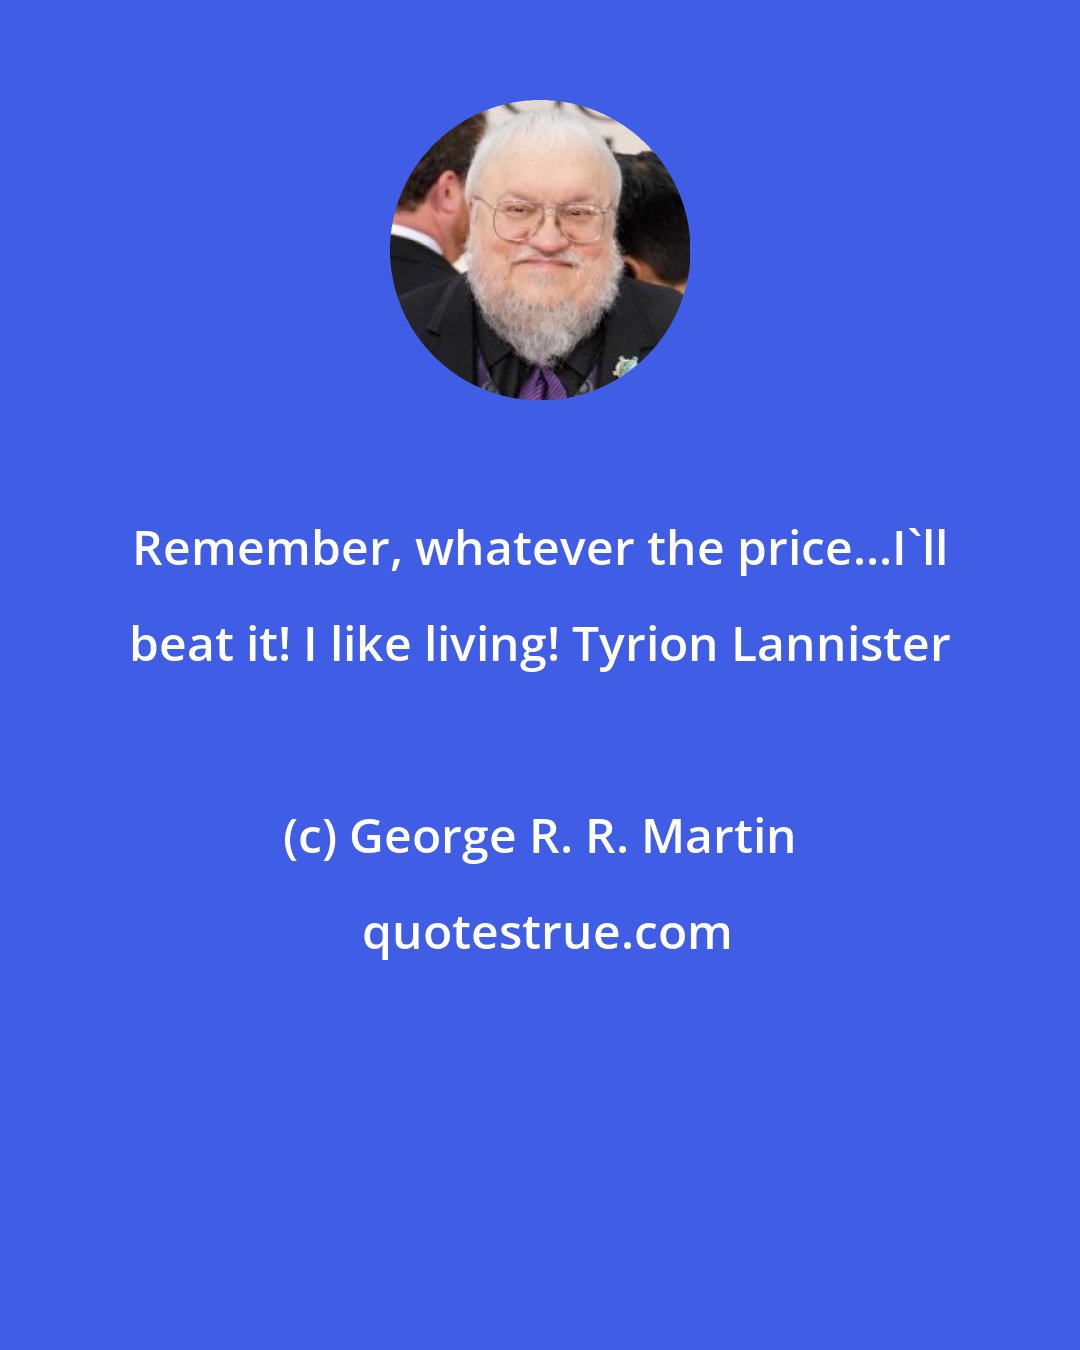 George R. R. Martin: Remember, whatever the price...I'll beat it! I like living! Tyrion Lannister